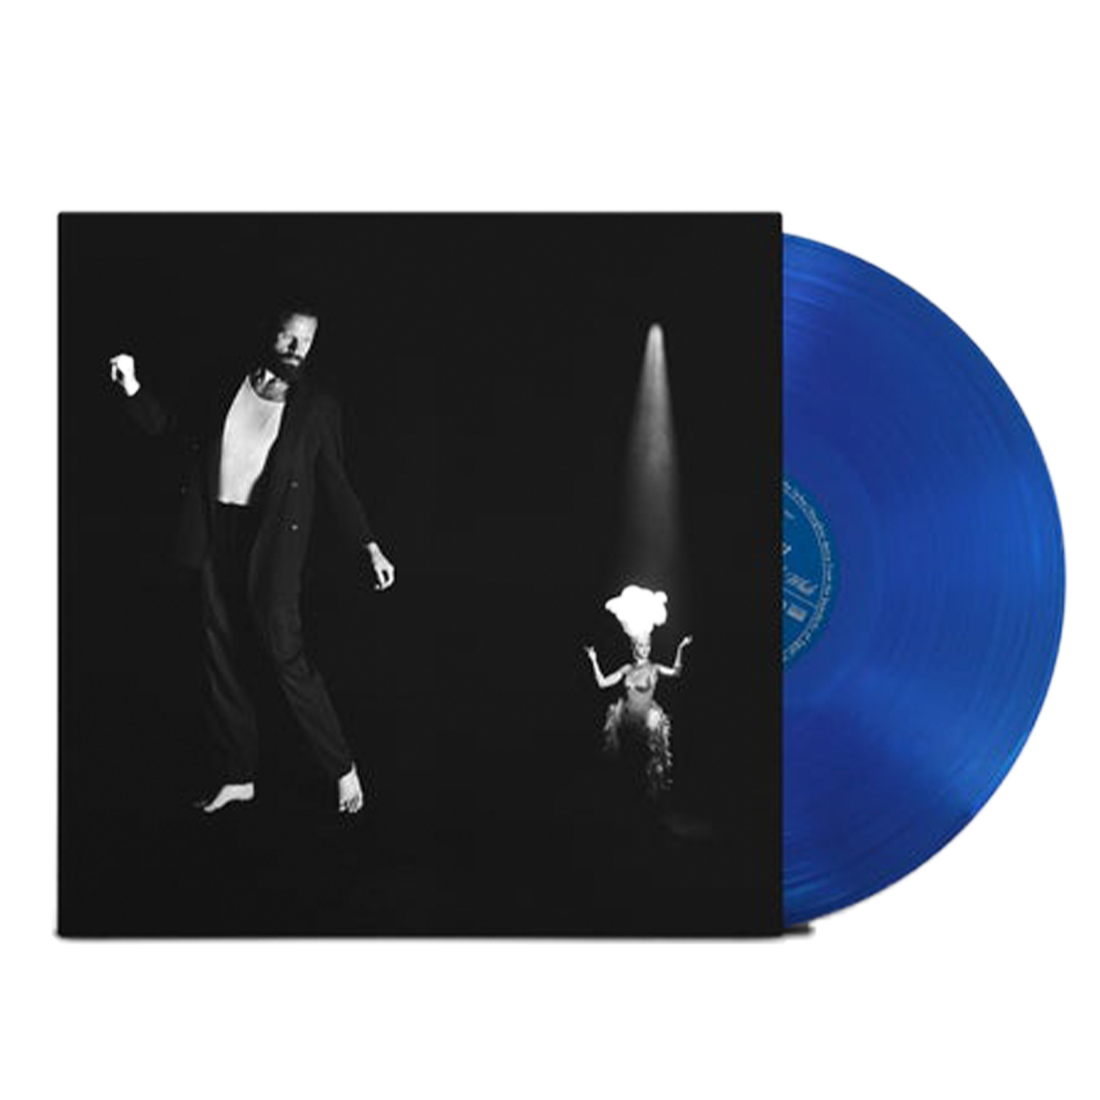 Father John Misty - Chloe and The Next 20th Century: Limited Blue Vinyl LP